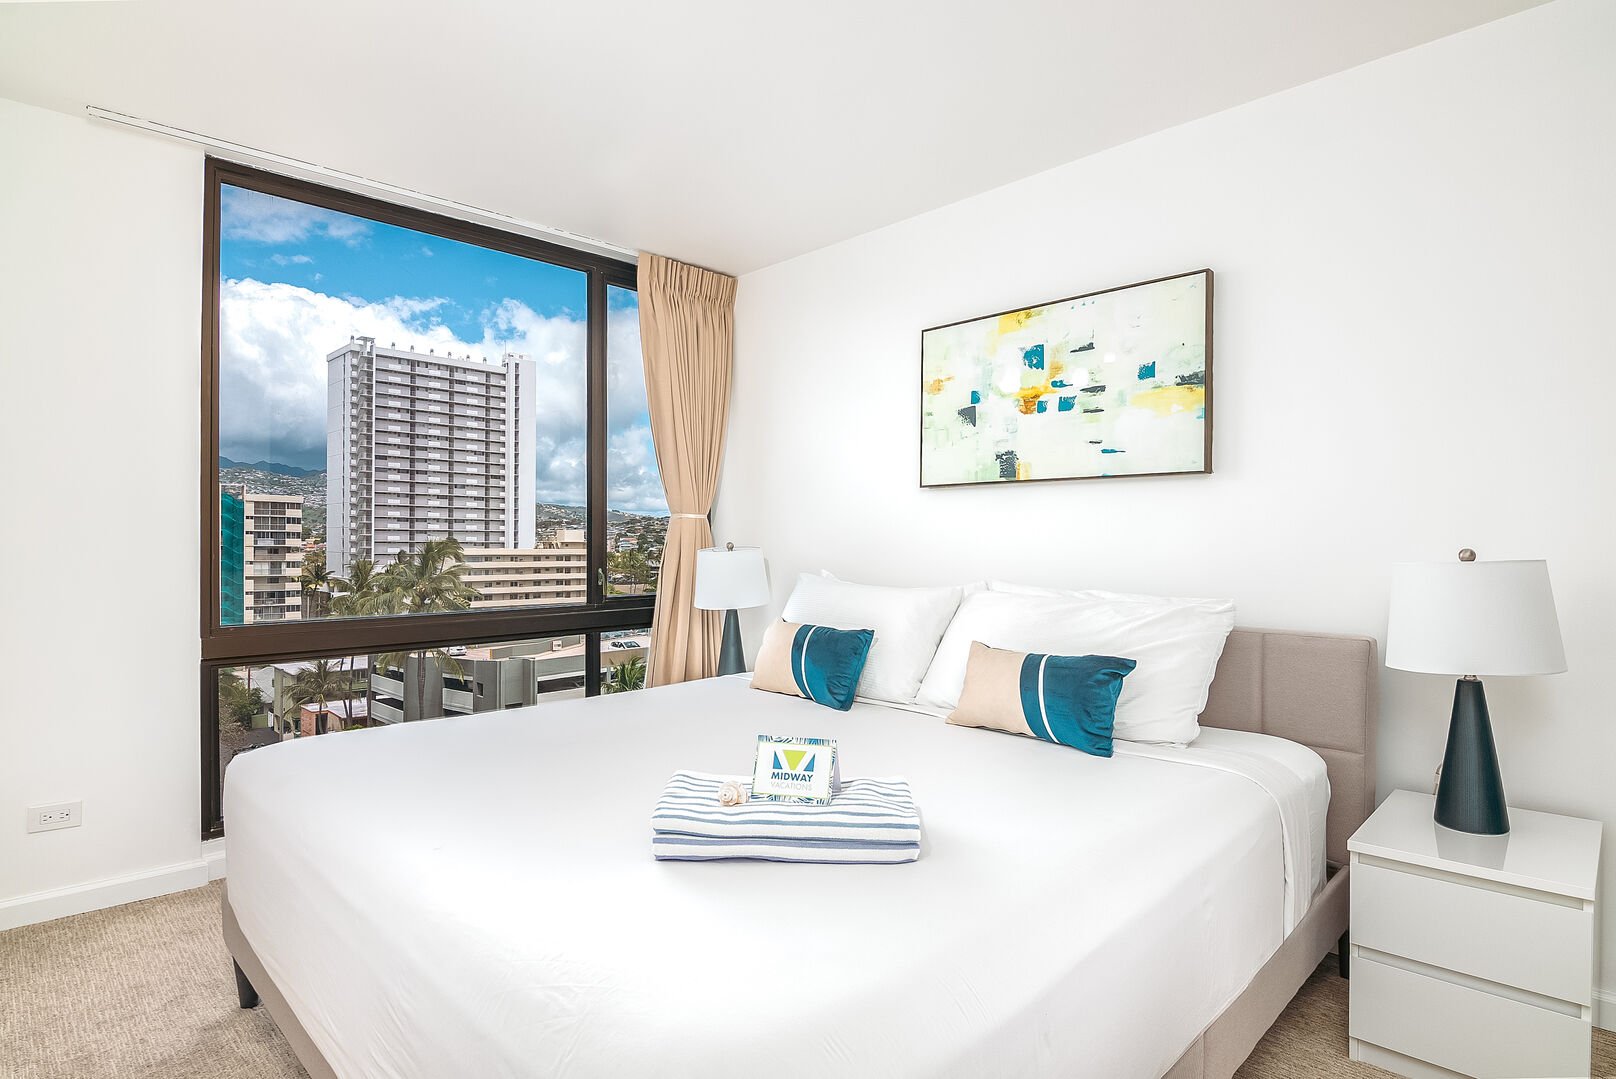 Have a restful night's sleep in your master bedroom with a king-size bed and beautiful view.